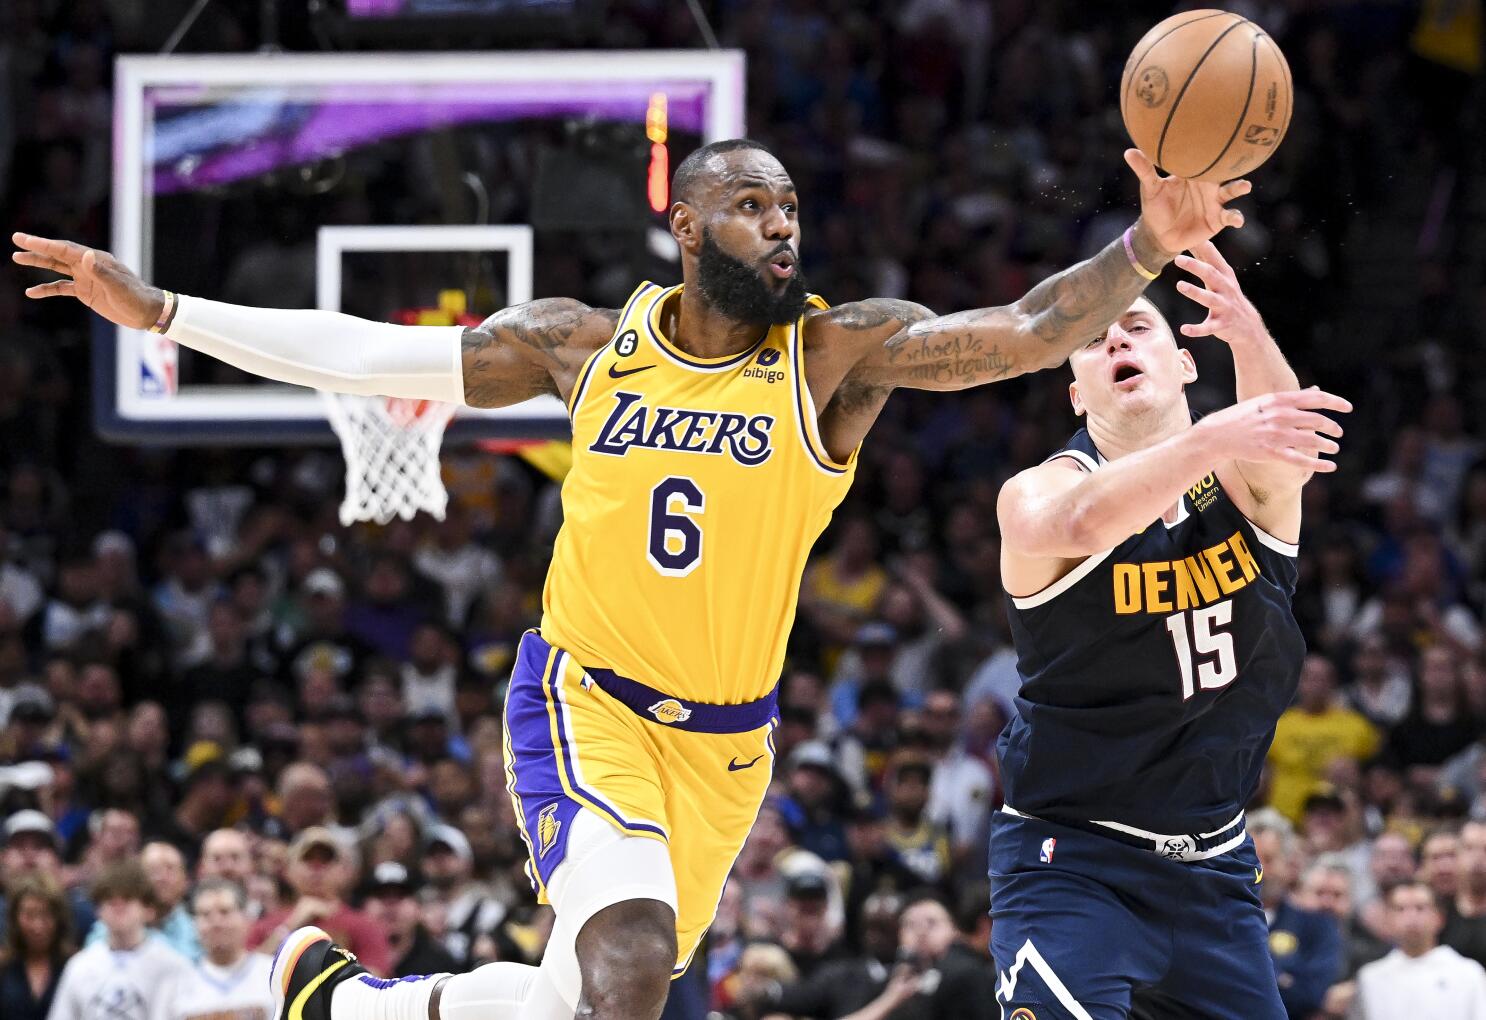 NBA Updates - REPORT: The Los Angeles Lakers are waiving wing